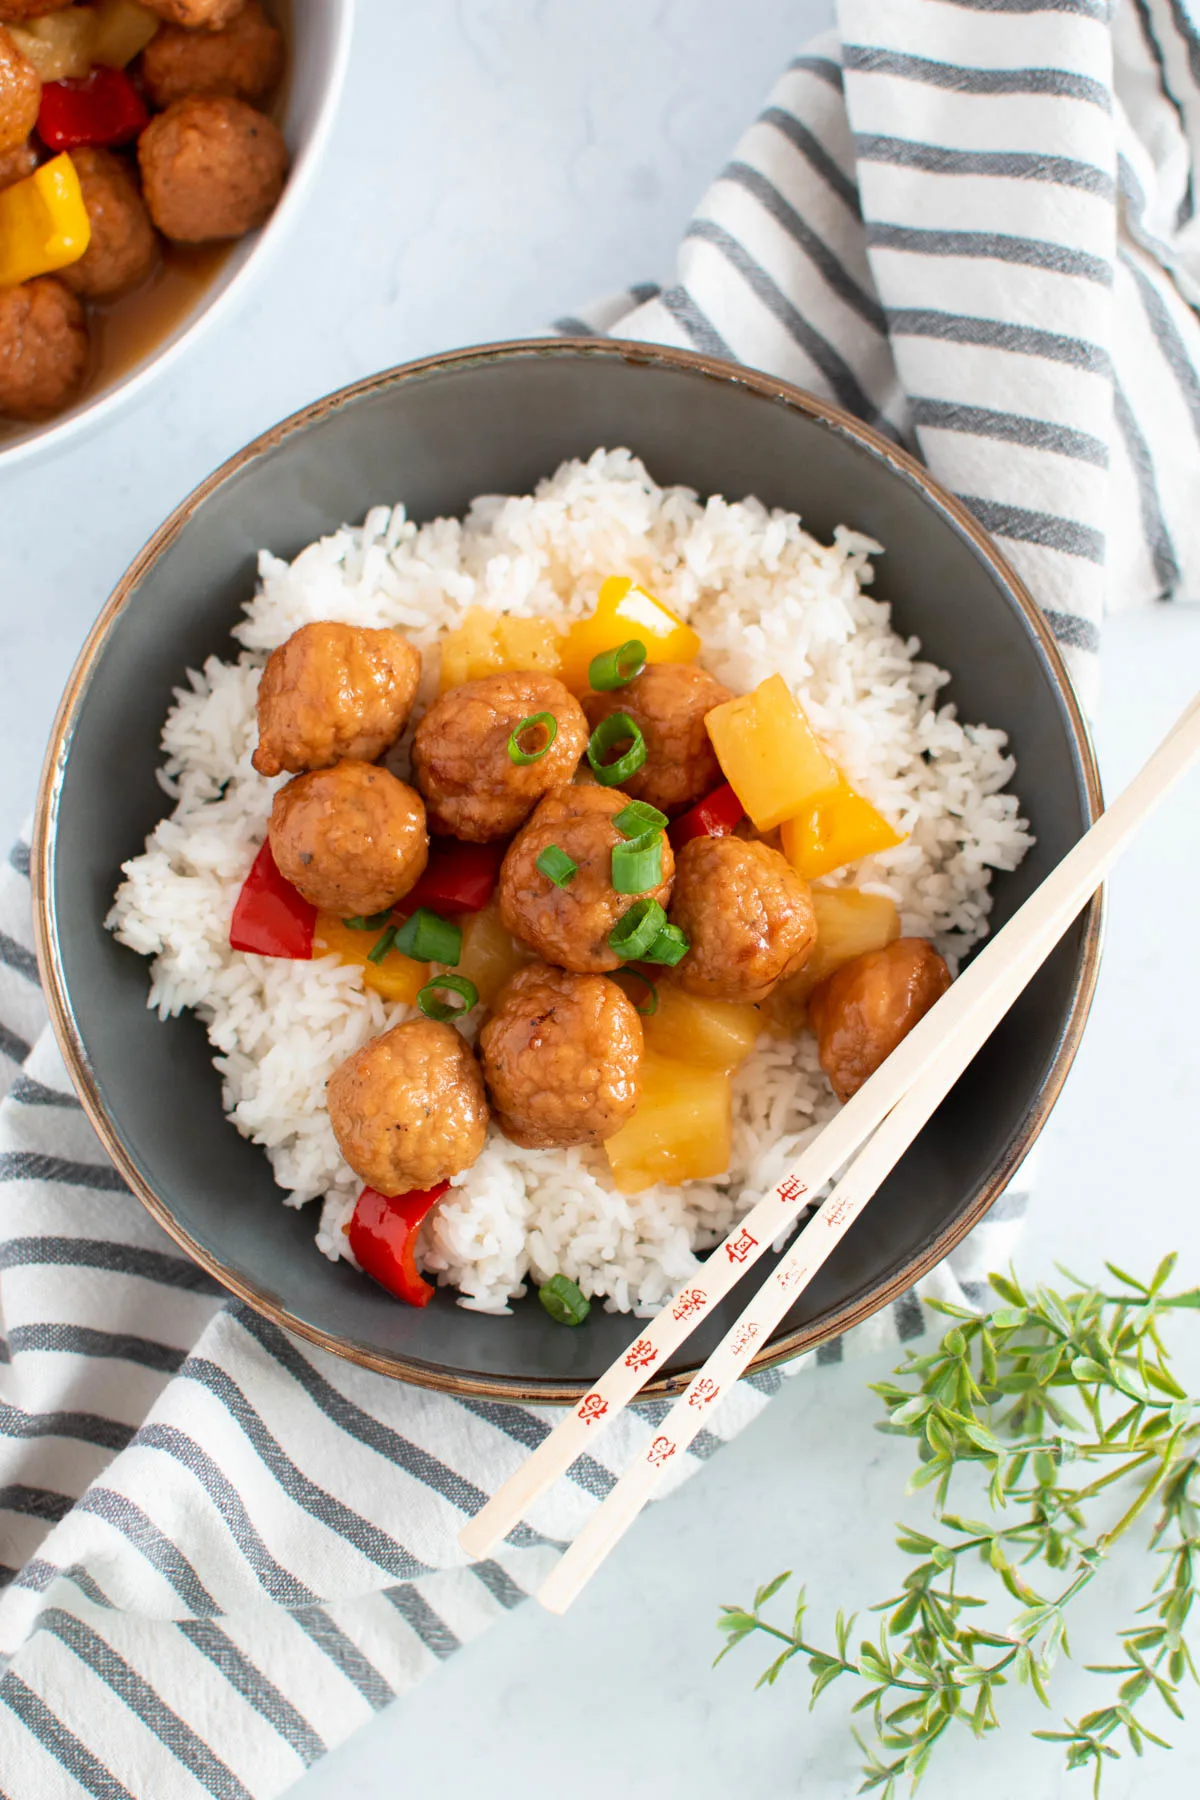 Sweet and sour meatballs over cooked white rice in gray bowl with chopsticks laying on bowl.